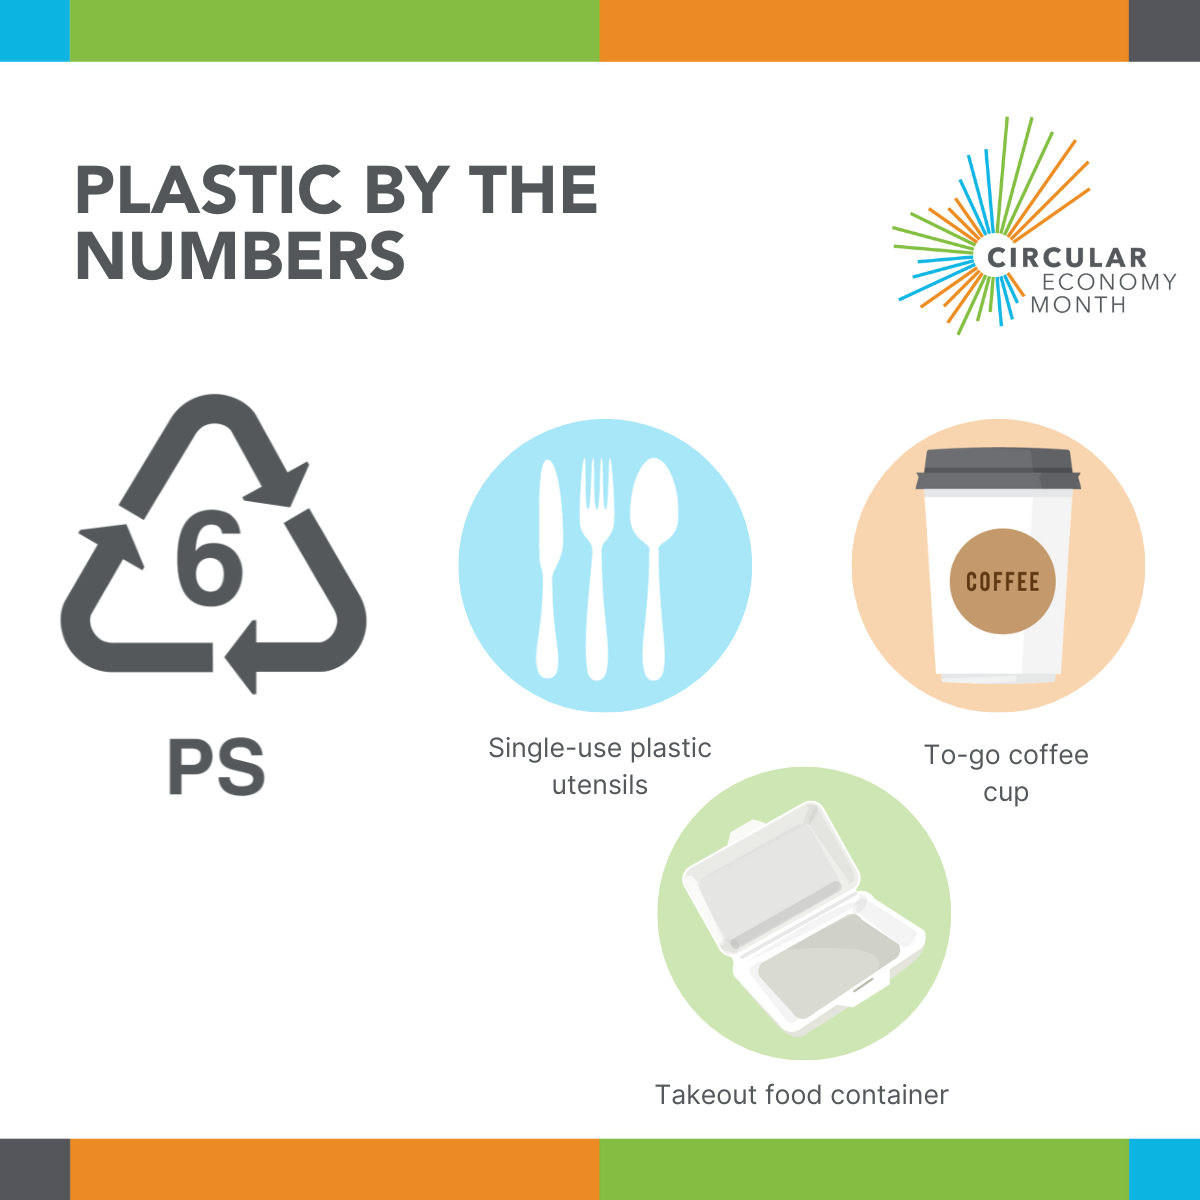 Plastic by the Numbers